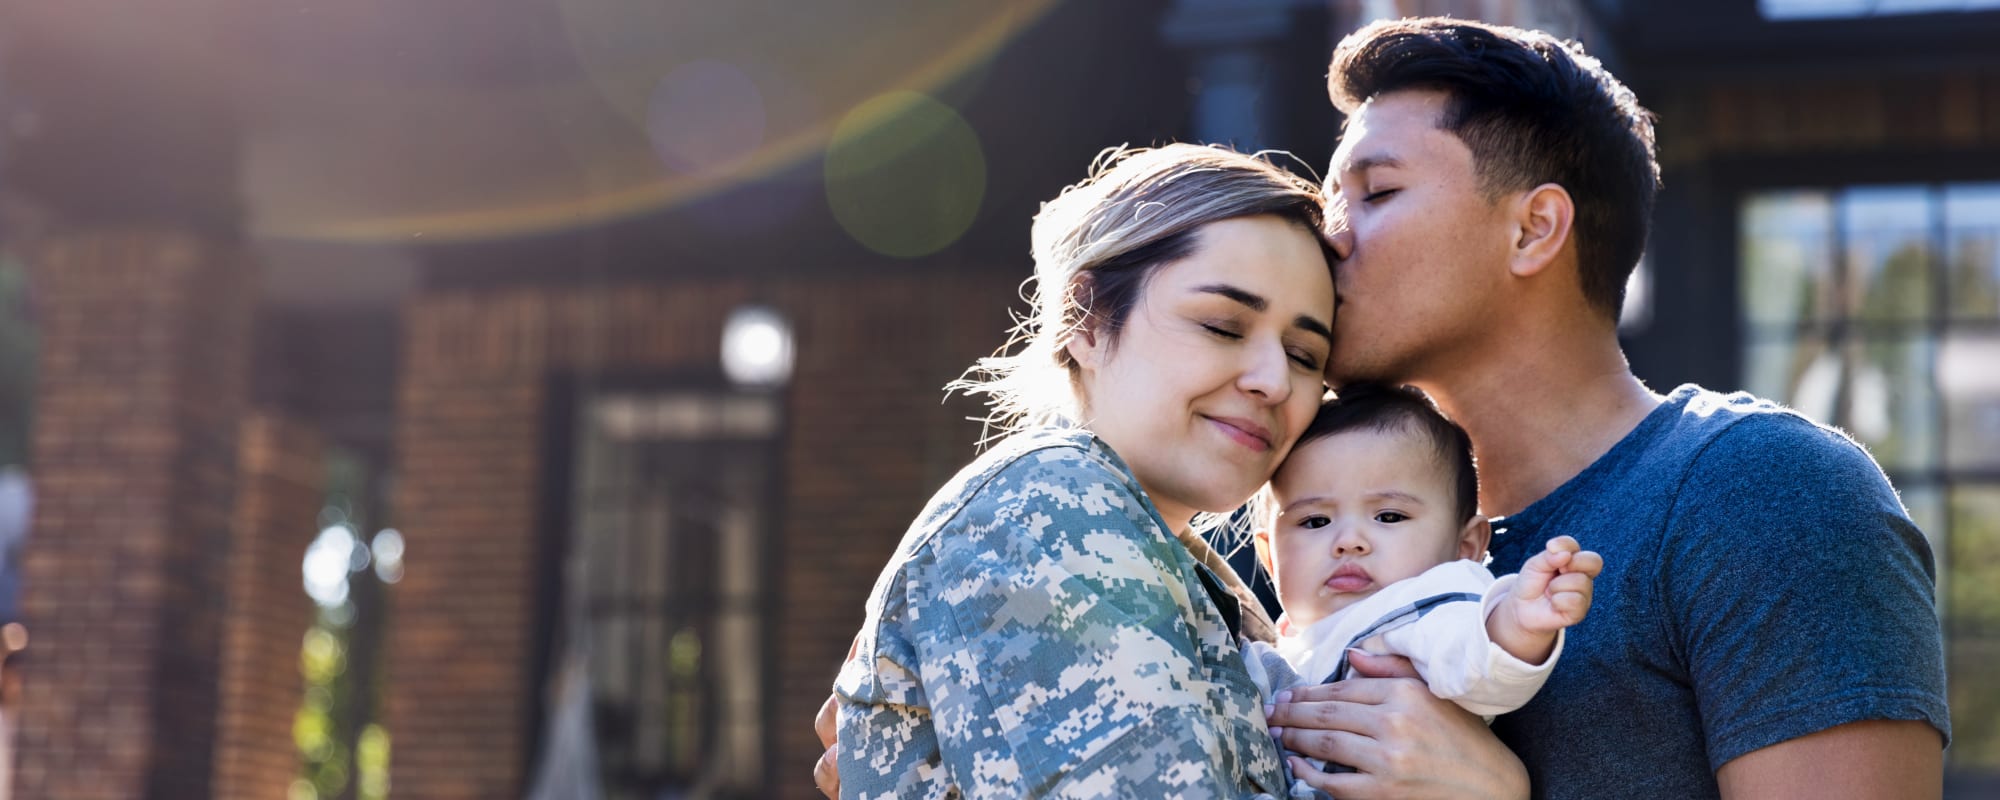 A military family embracing outside at The Village at Serra Mesa in San Diego, California